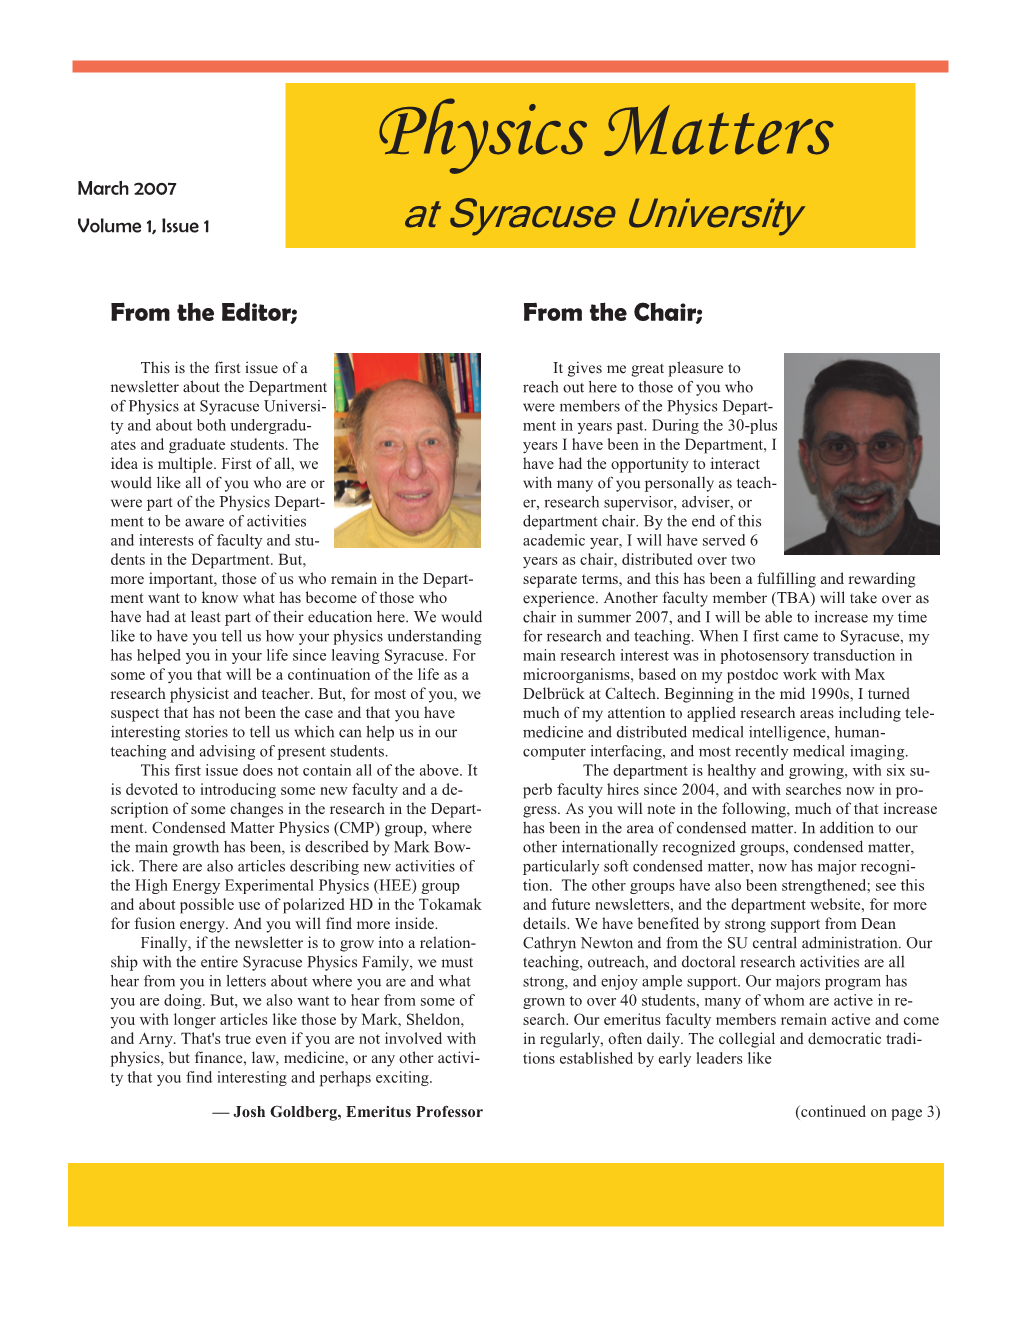 Physics Matters March 2007 Volume 1, Issue 1 at Syracuse University